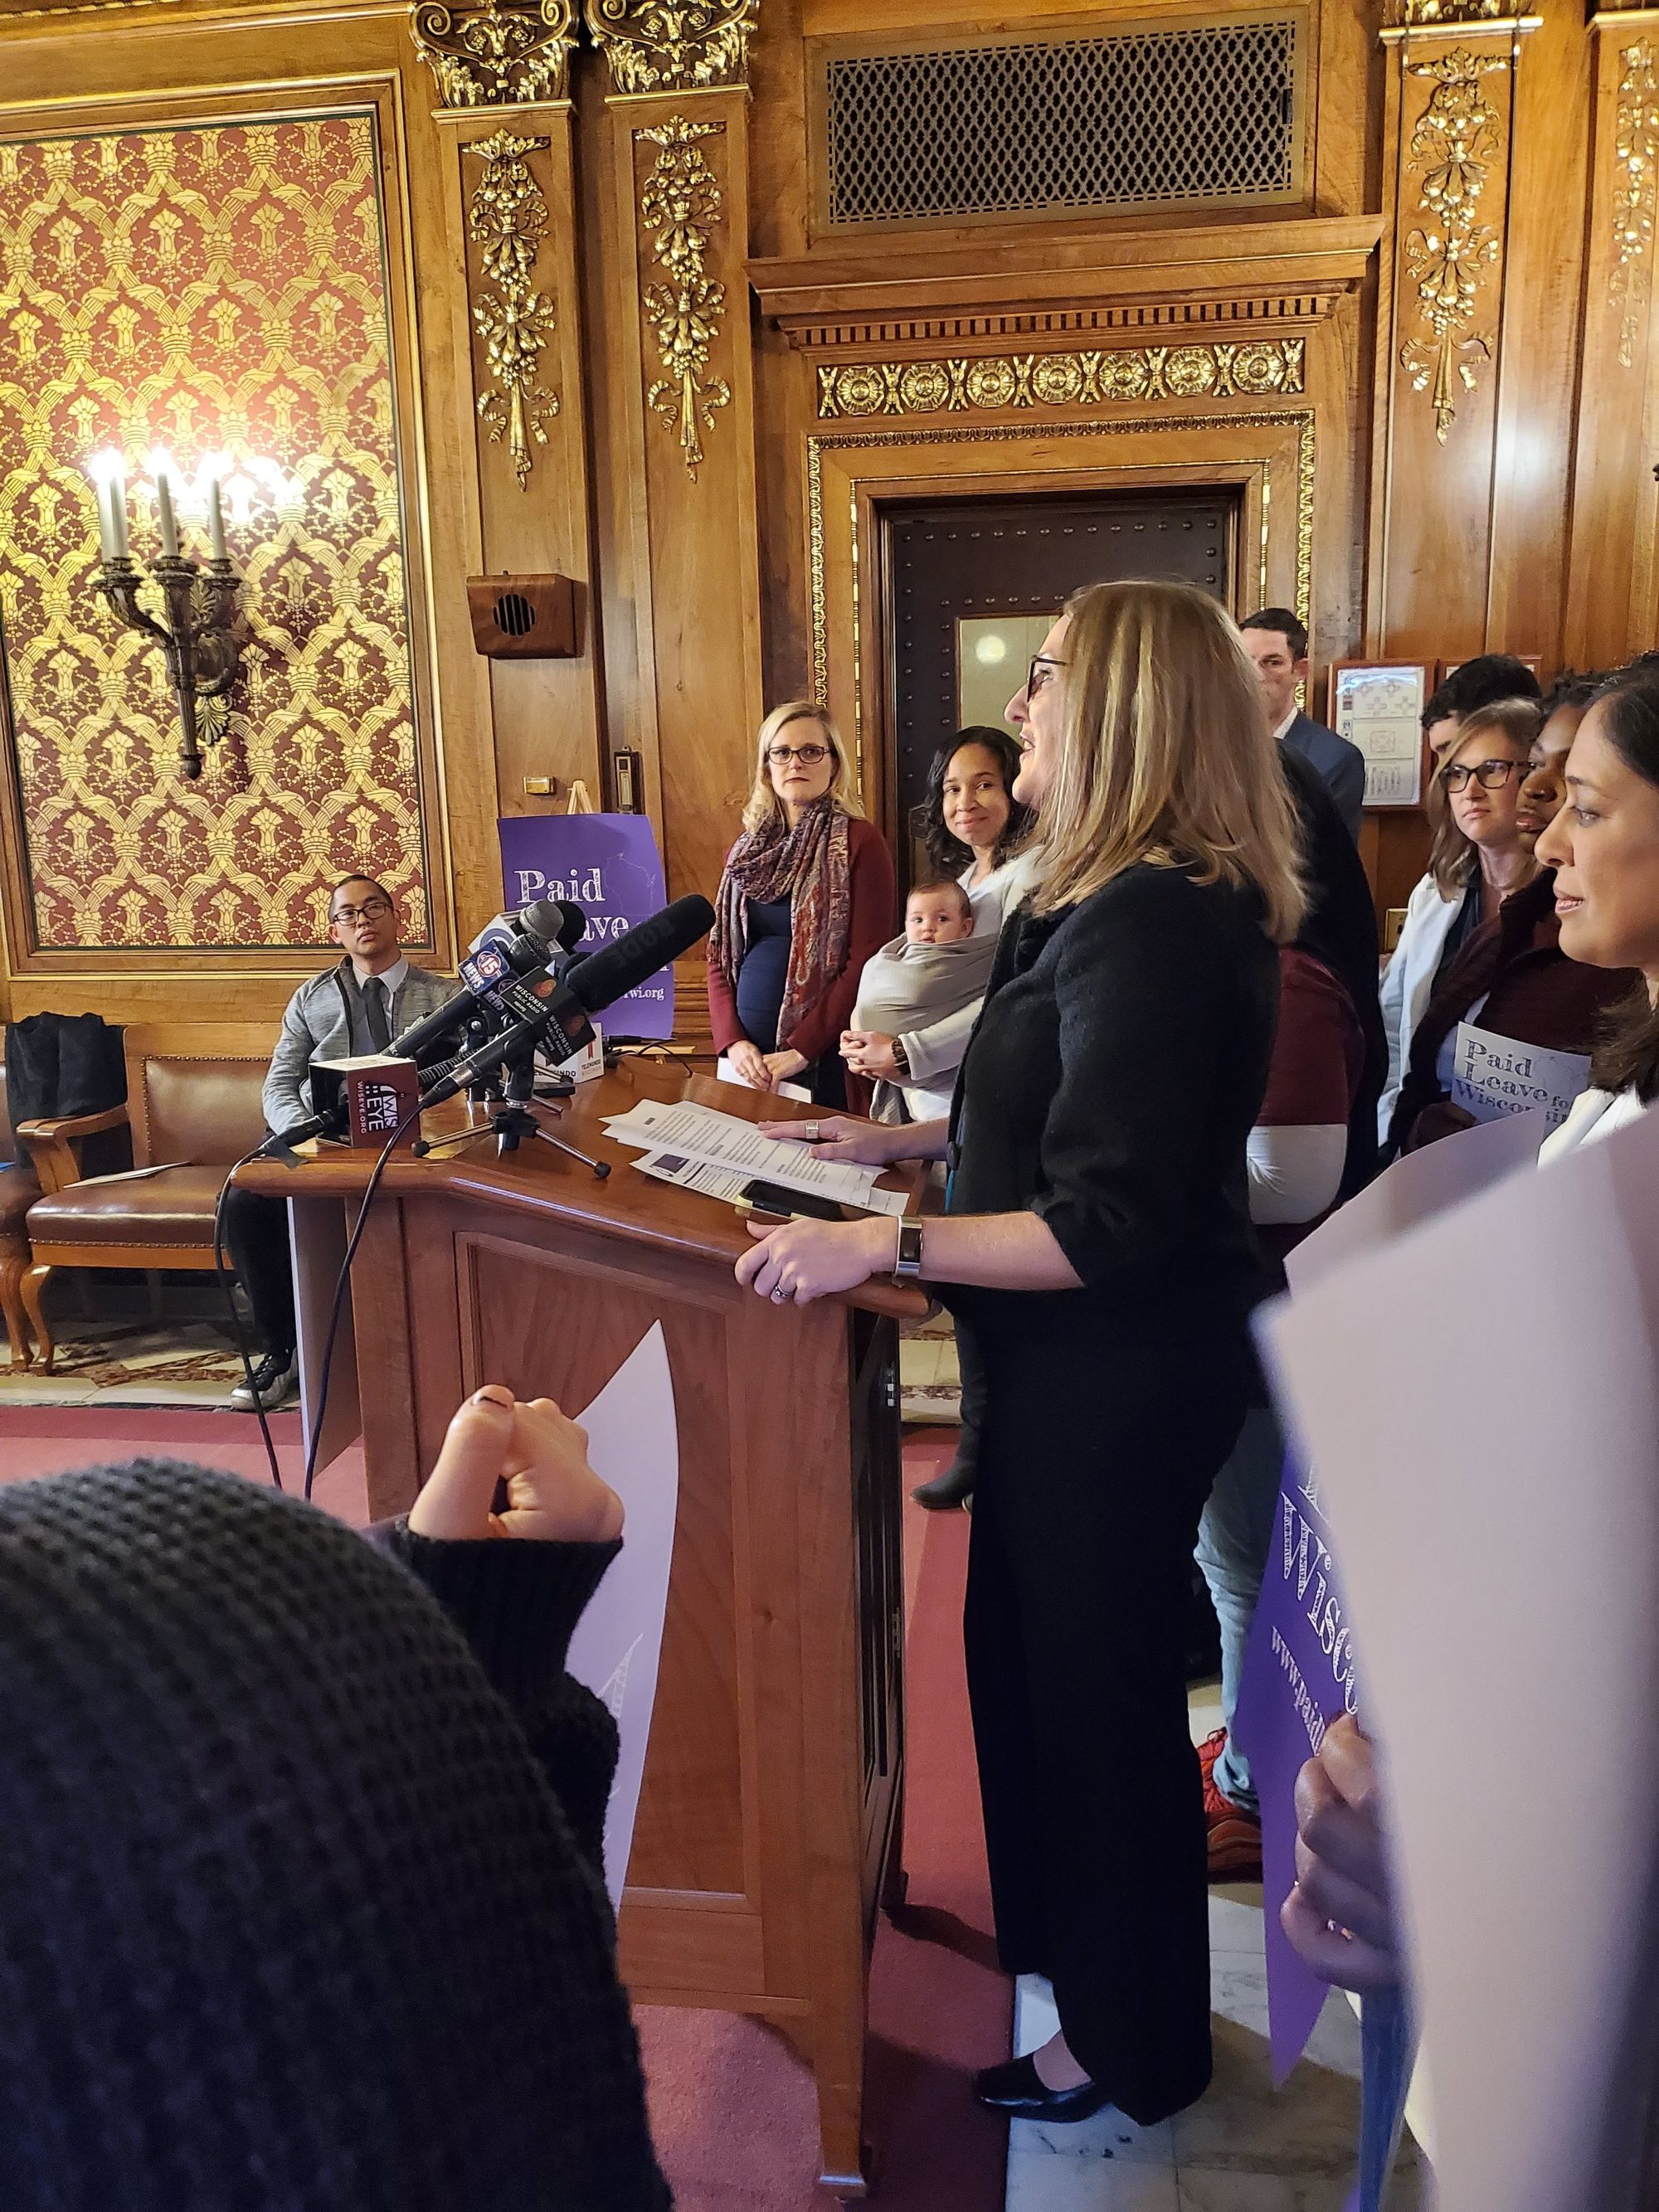 Image of a light skinned woman with light brown hair and dark glasses speaking at a wood podium. There are a variety of people standing around her, some with purple signs that say Paid Leave Wisconsin.       . 